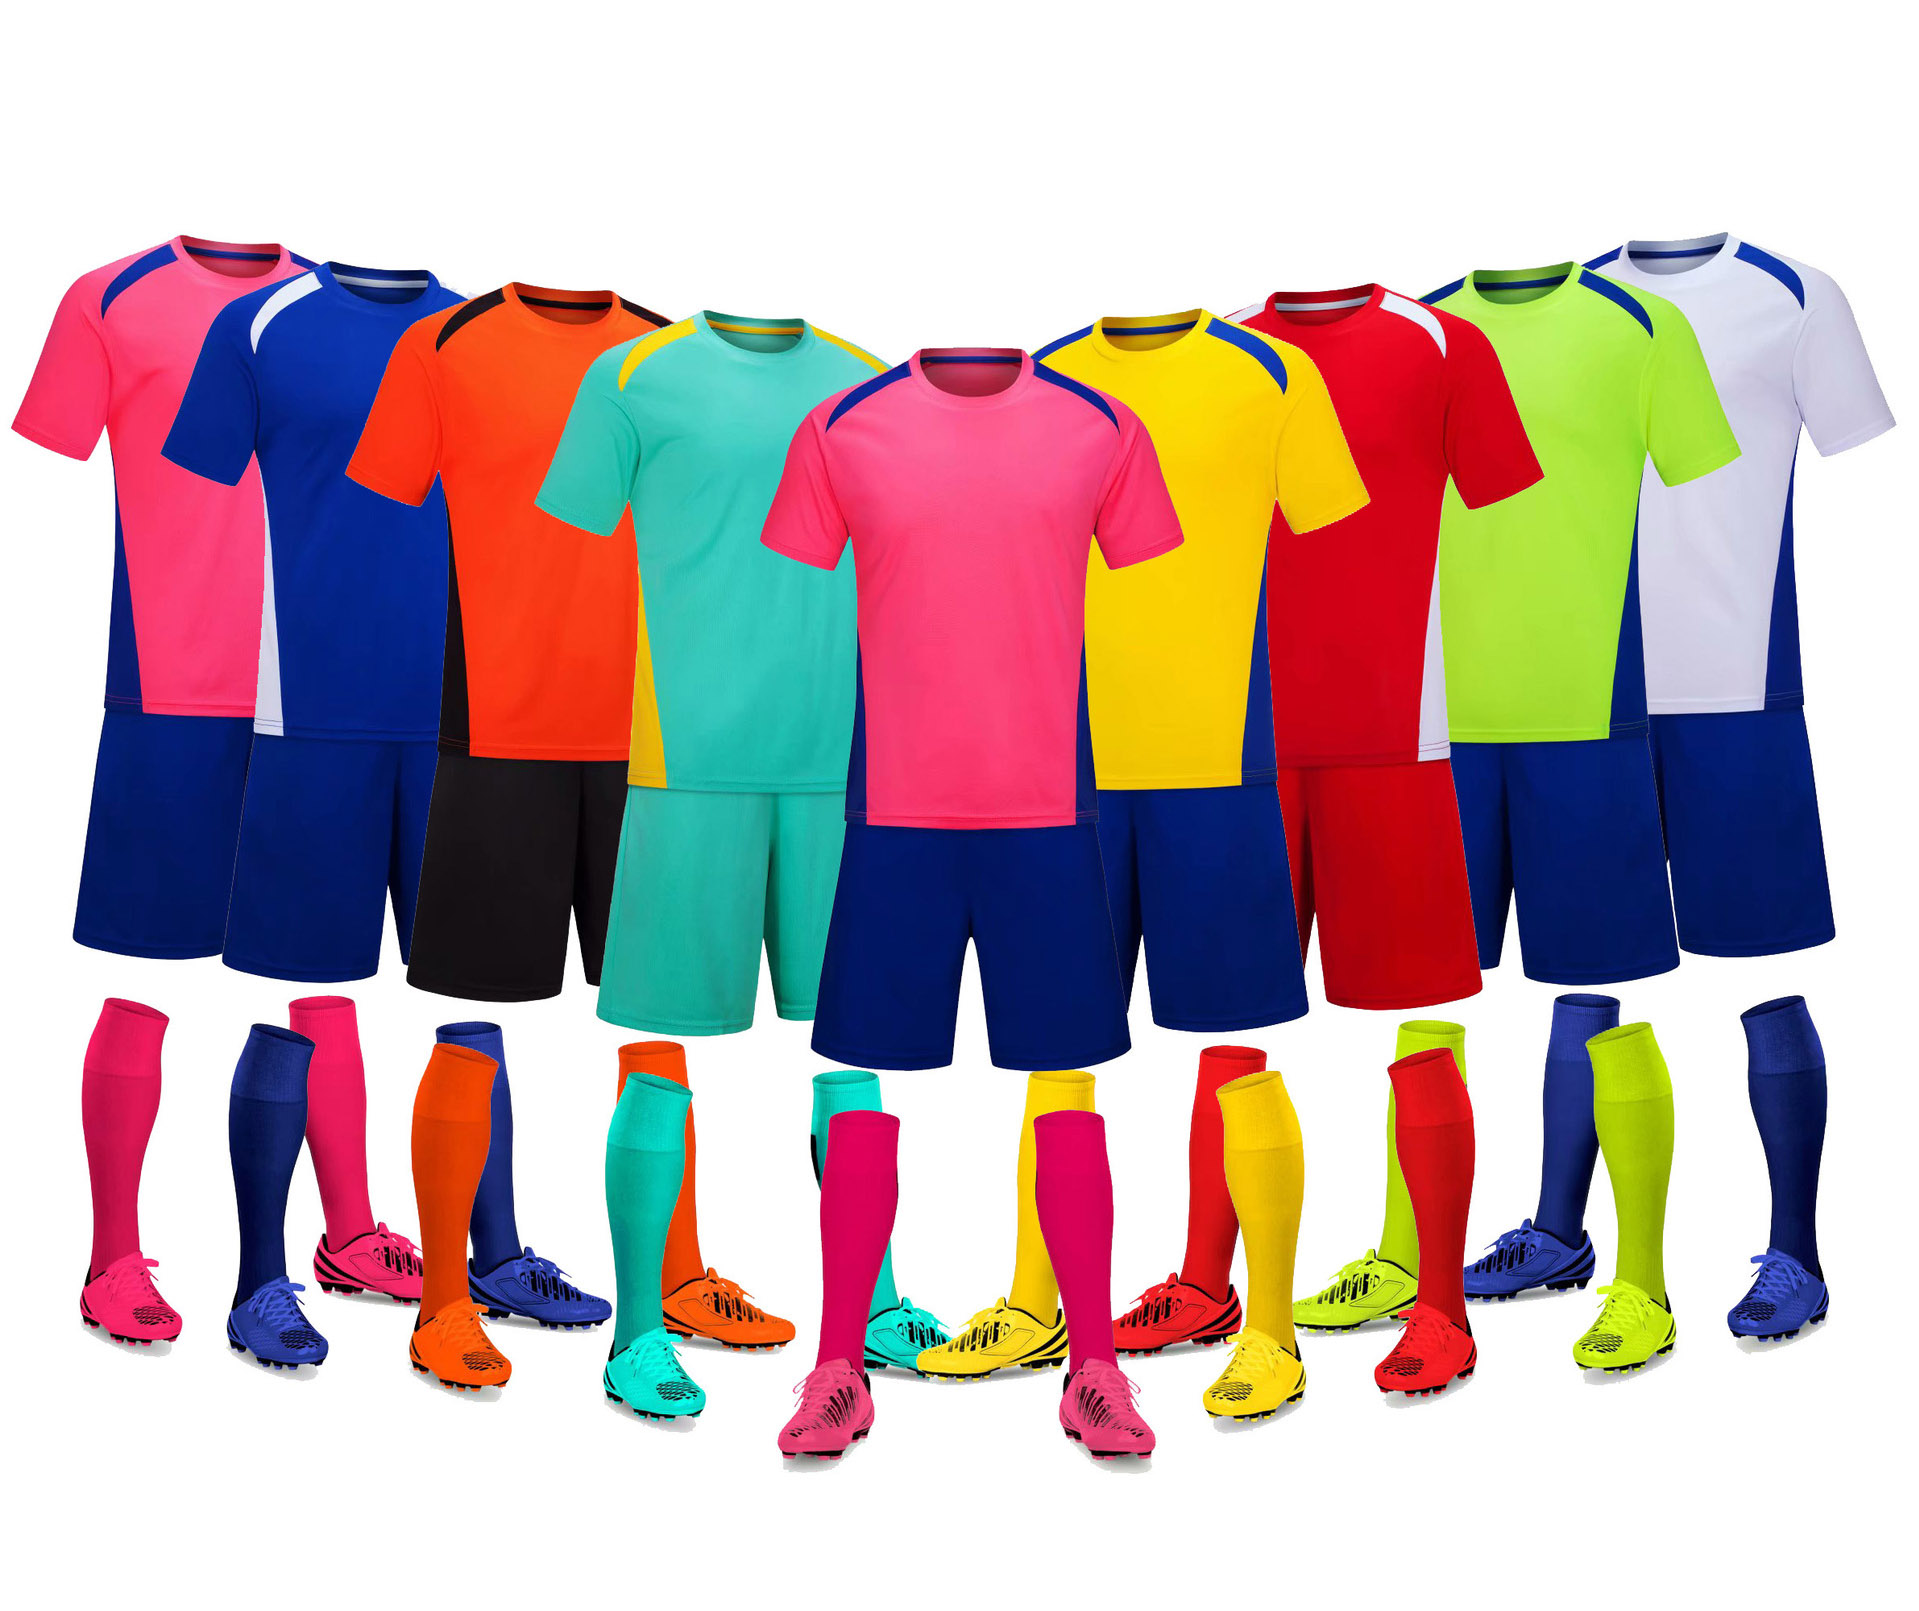 Maillots De Foot Pas Cher (How to Customized Your Cheap Football Shirt)